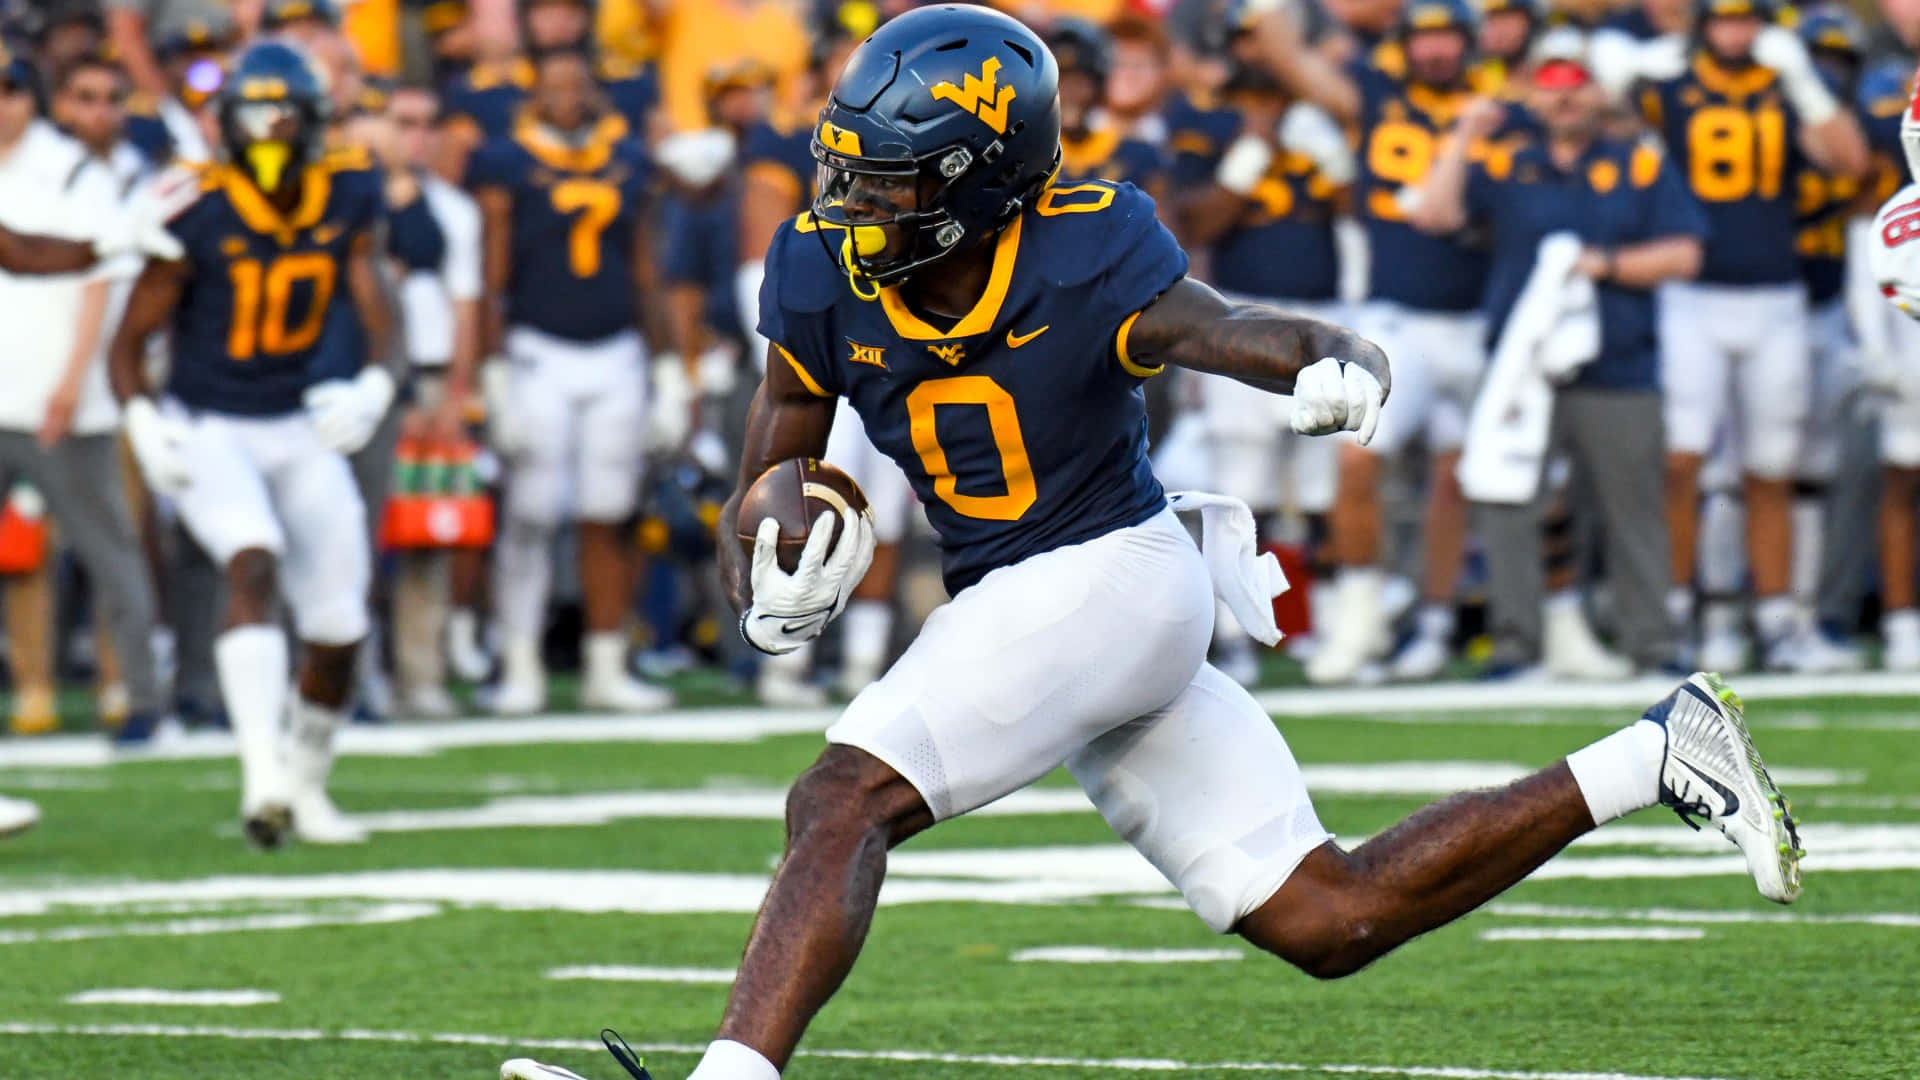 West Virginia Football Fortifies its Fans with Pride Wallpaper